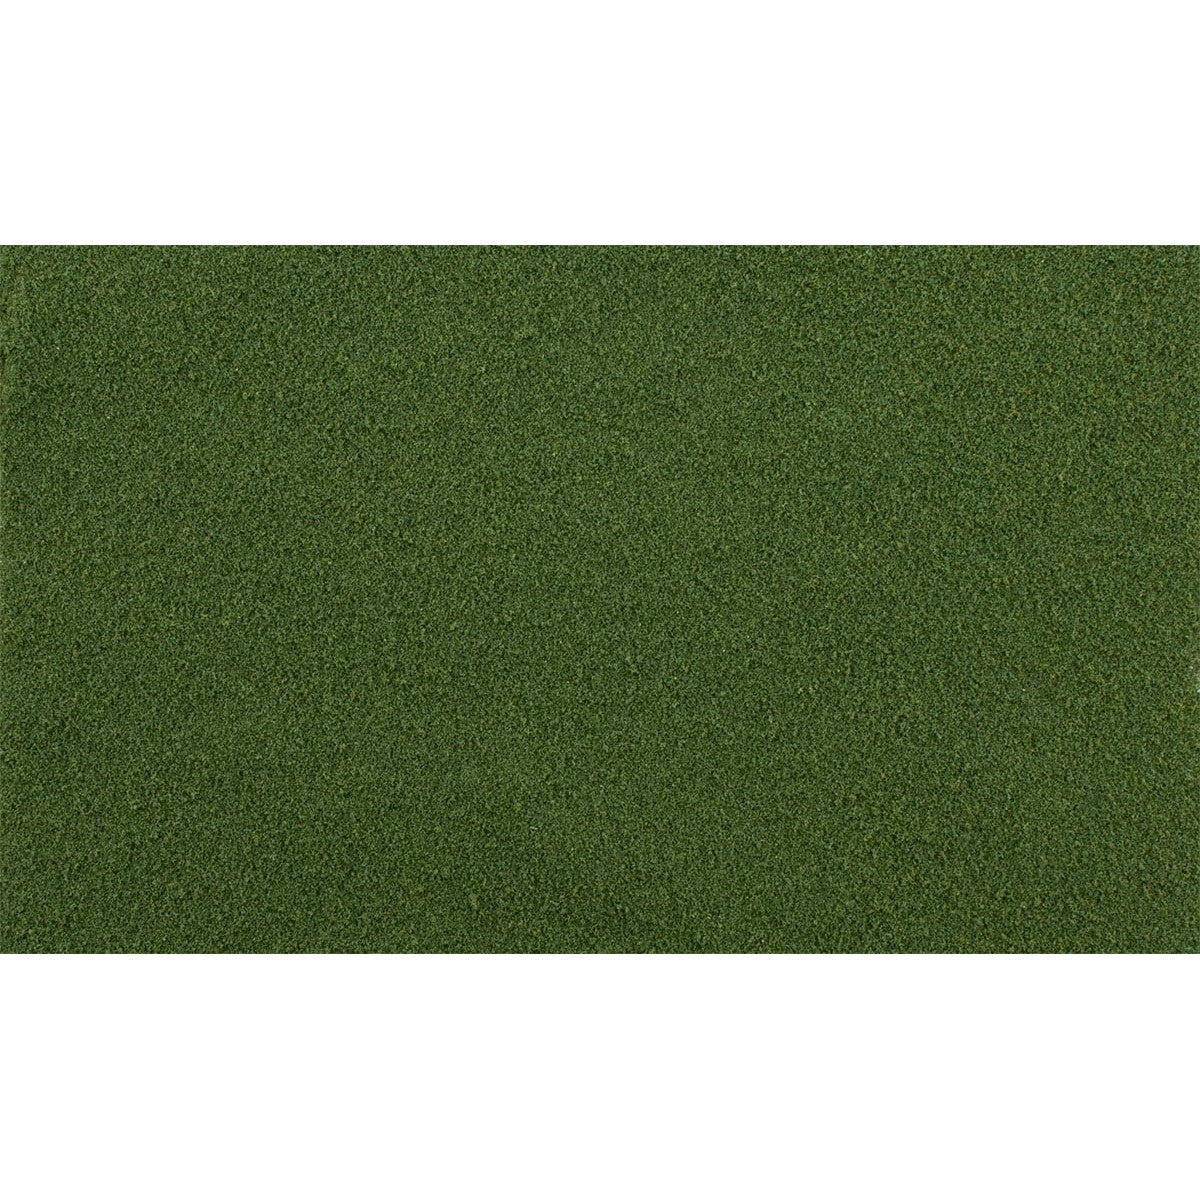 Spring Grass - Spring Grass is pre-blended and easy to apply on your terrain feature, miniature base or gaming board